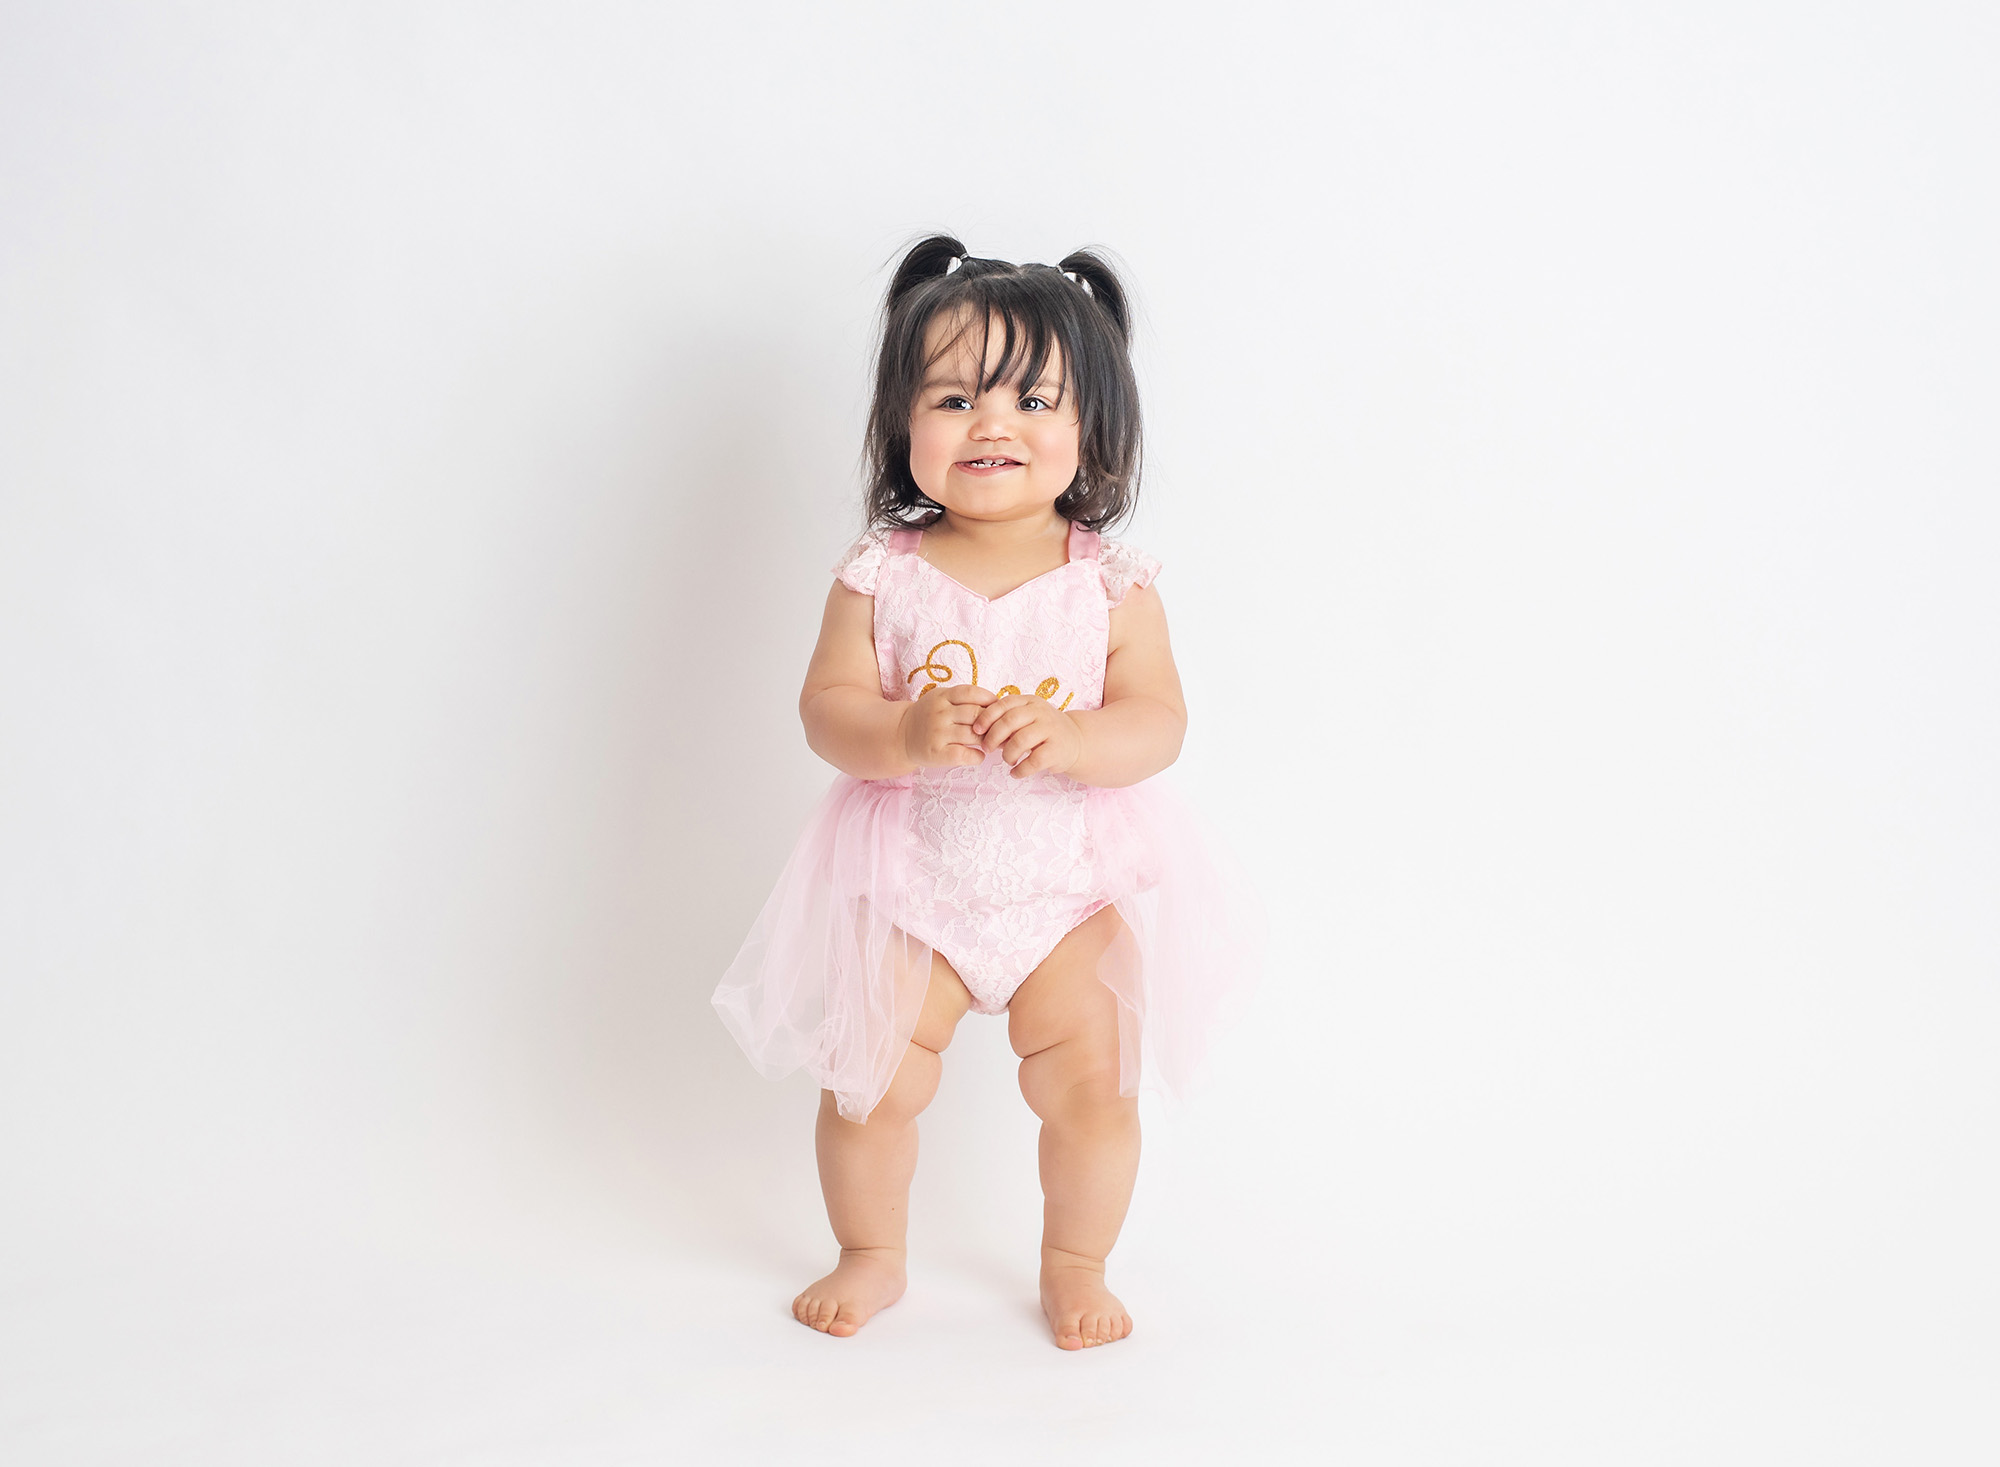 One Year Old Photo Session one year old baby girl in pigtails and pink laced one dress standing and smiling on neutral background